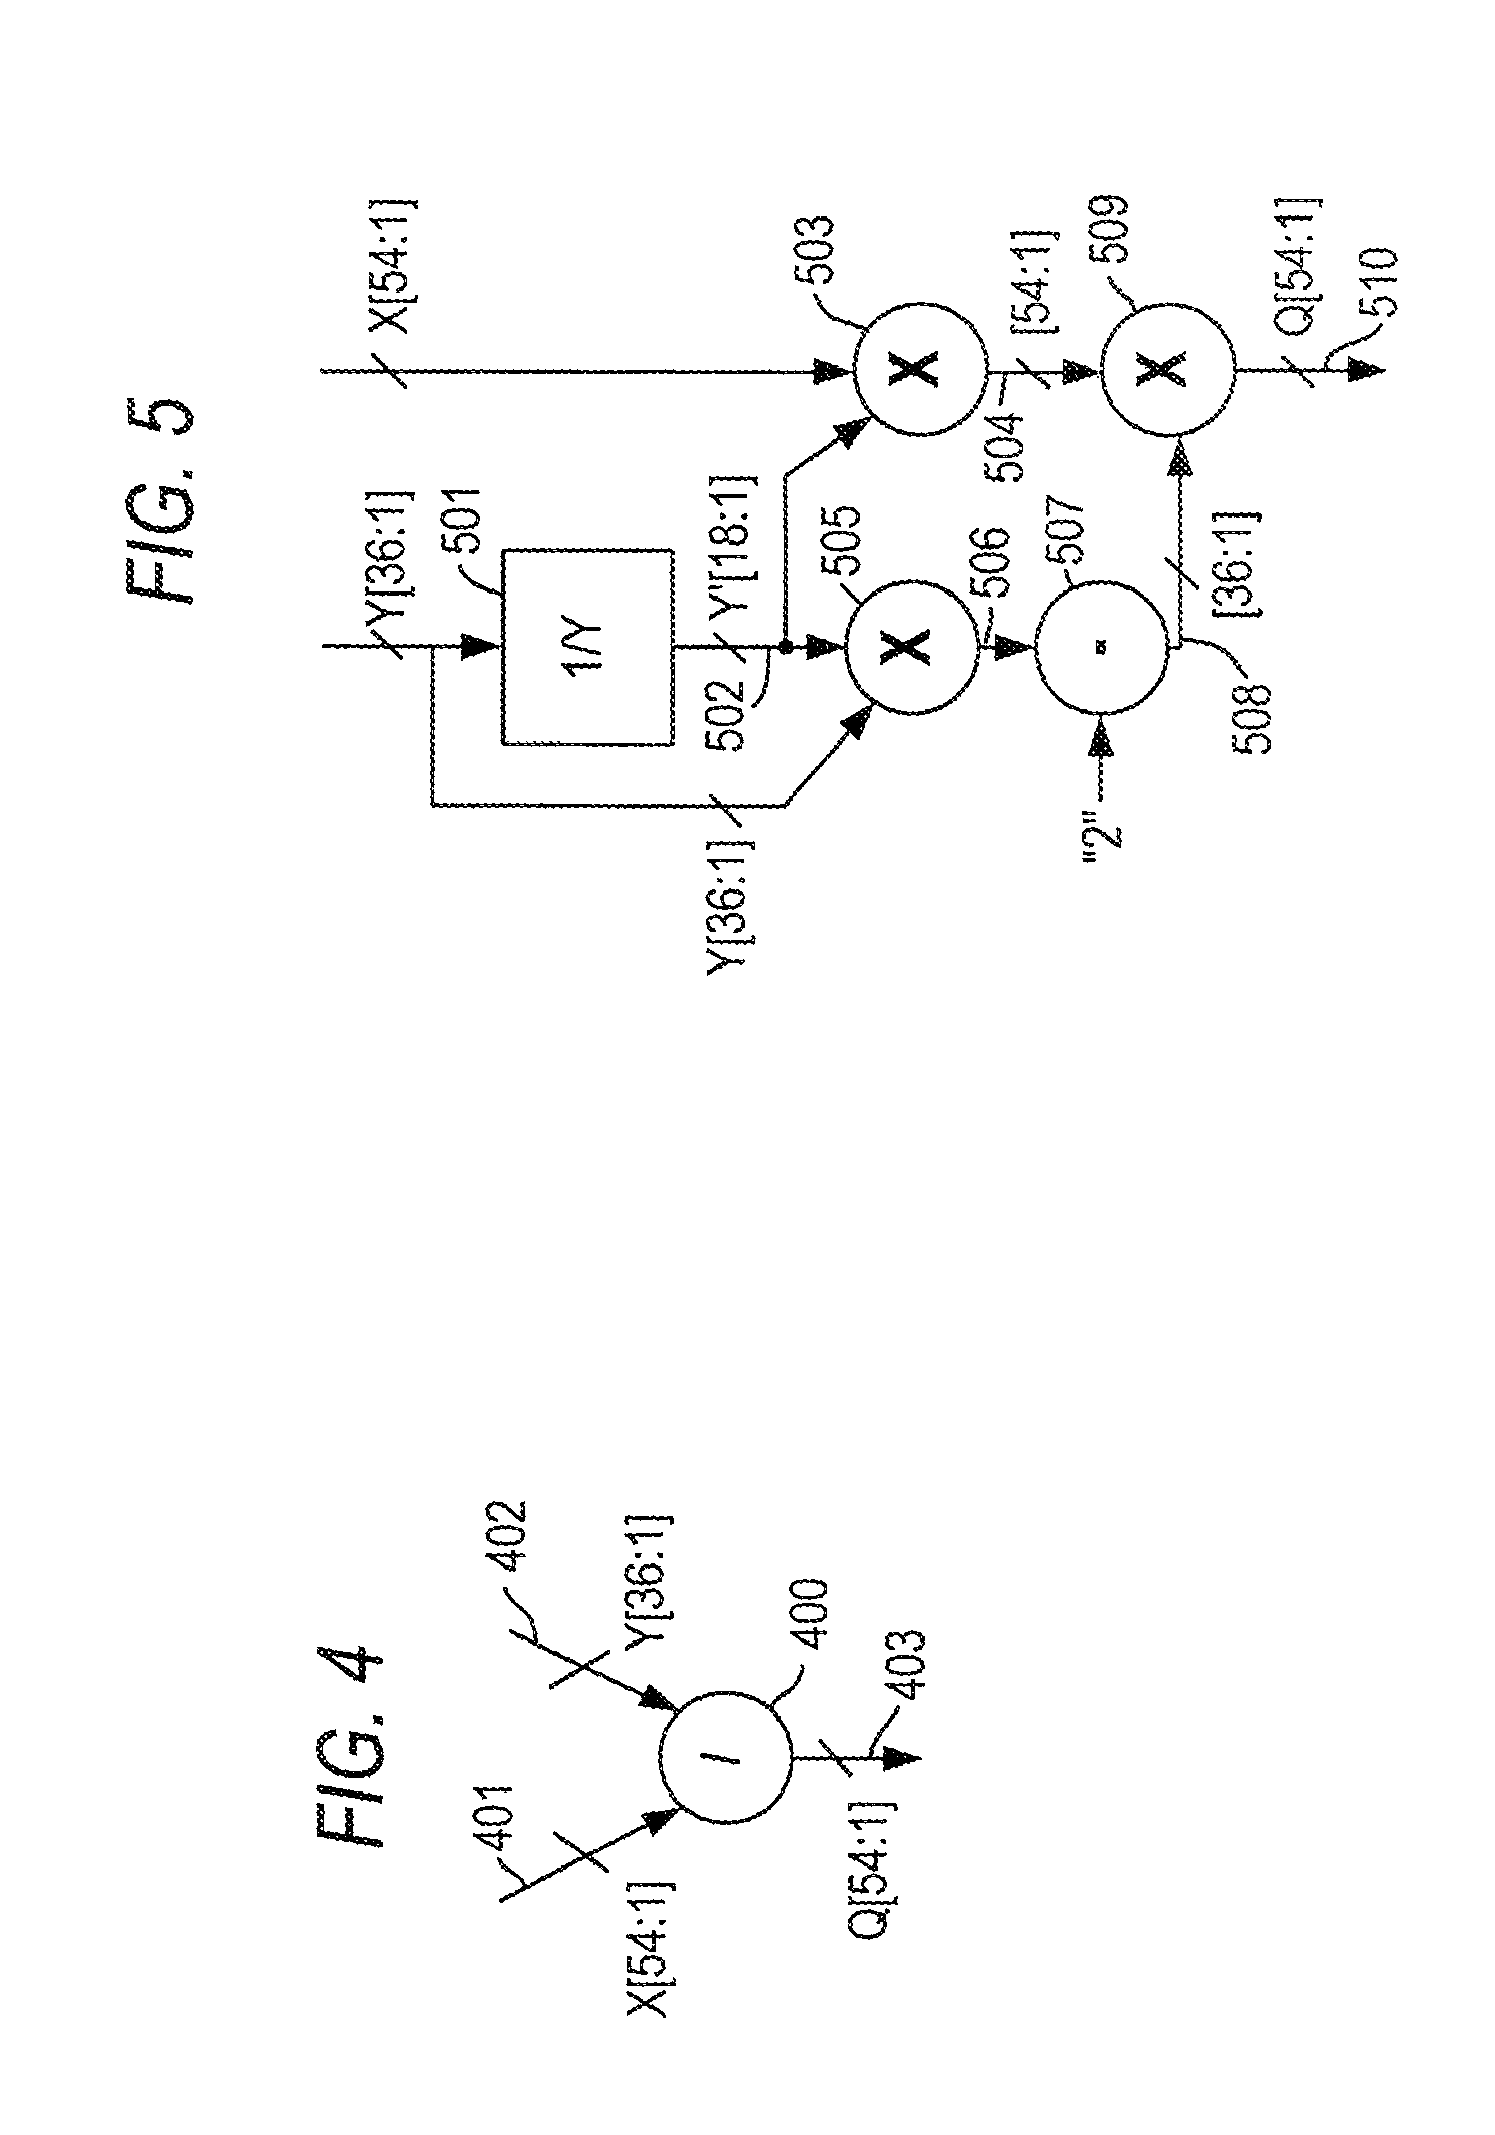 Implementing mixed-precision floating-point operations in a programmable integrated circuit device